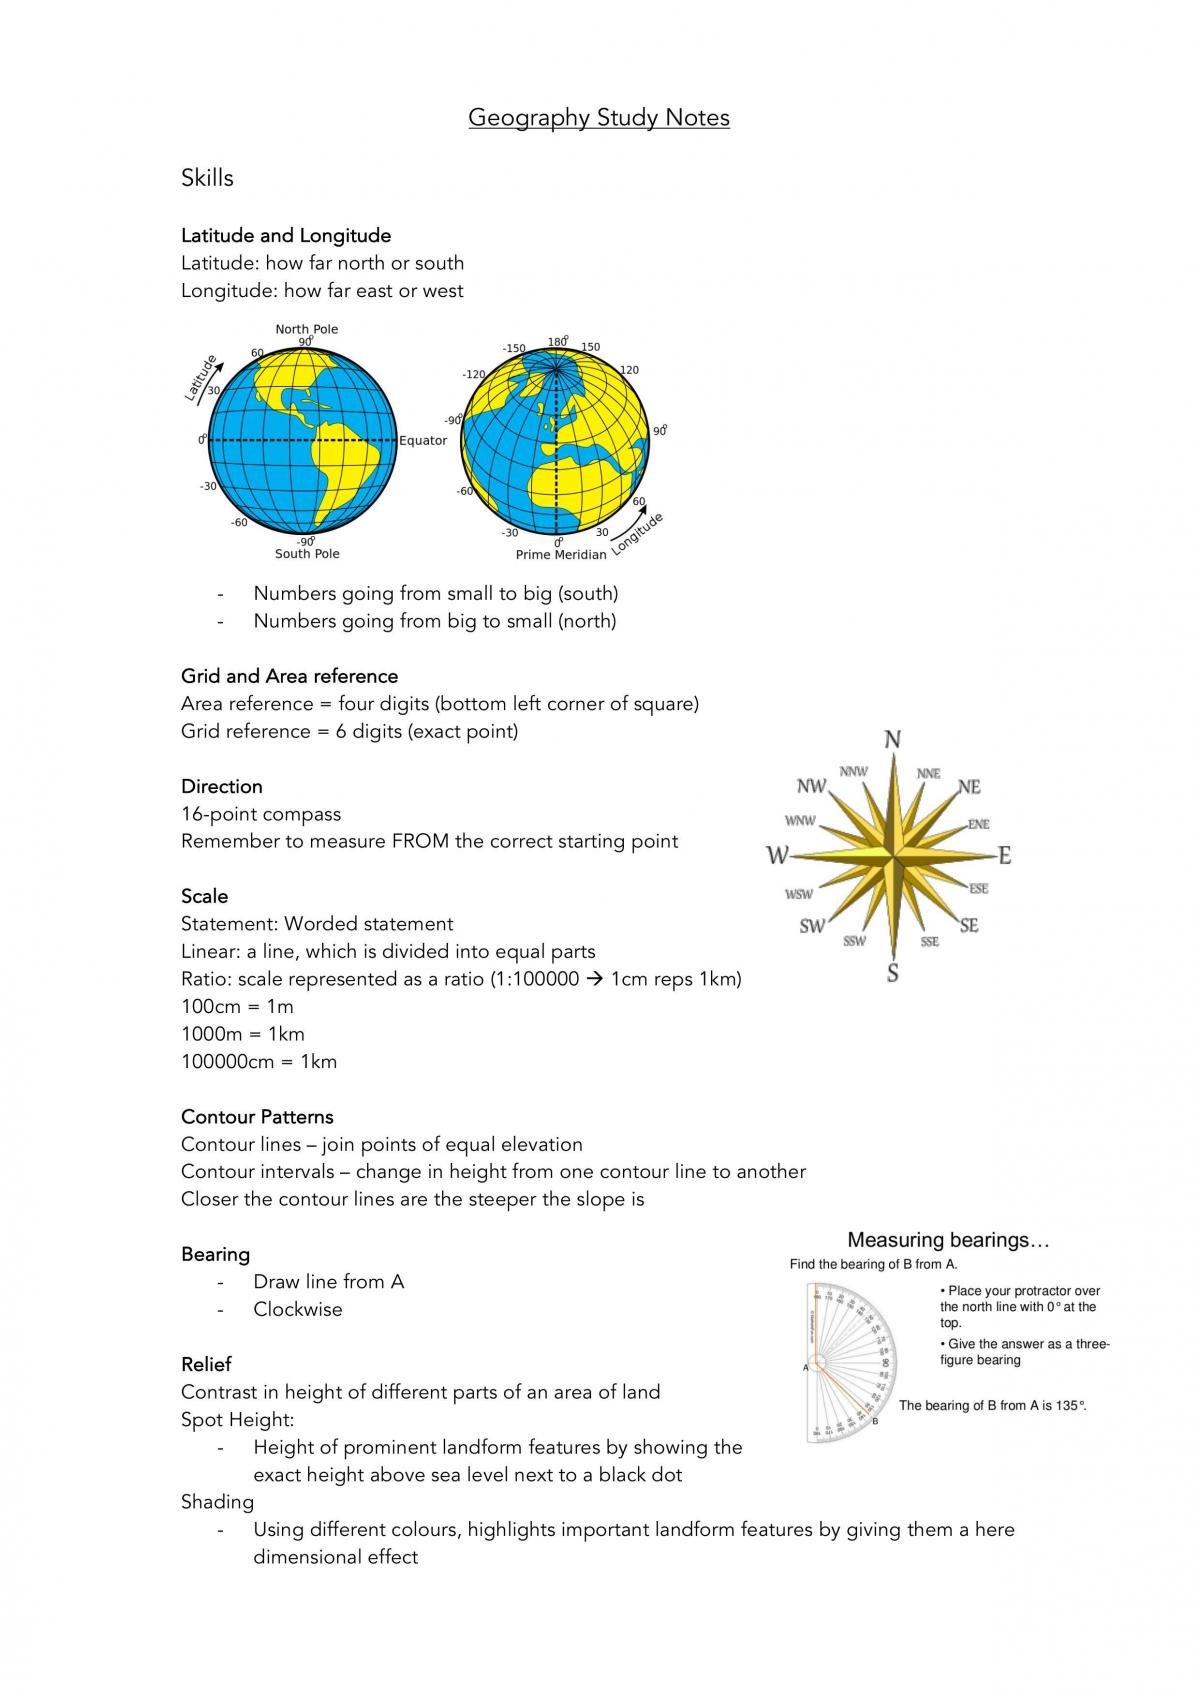 Geography Year 11 - Skills & Biophysical Interactions - Page 1